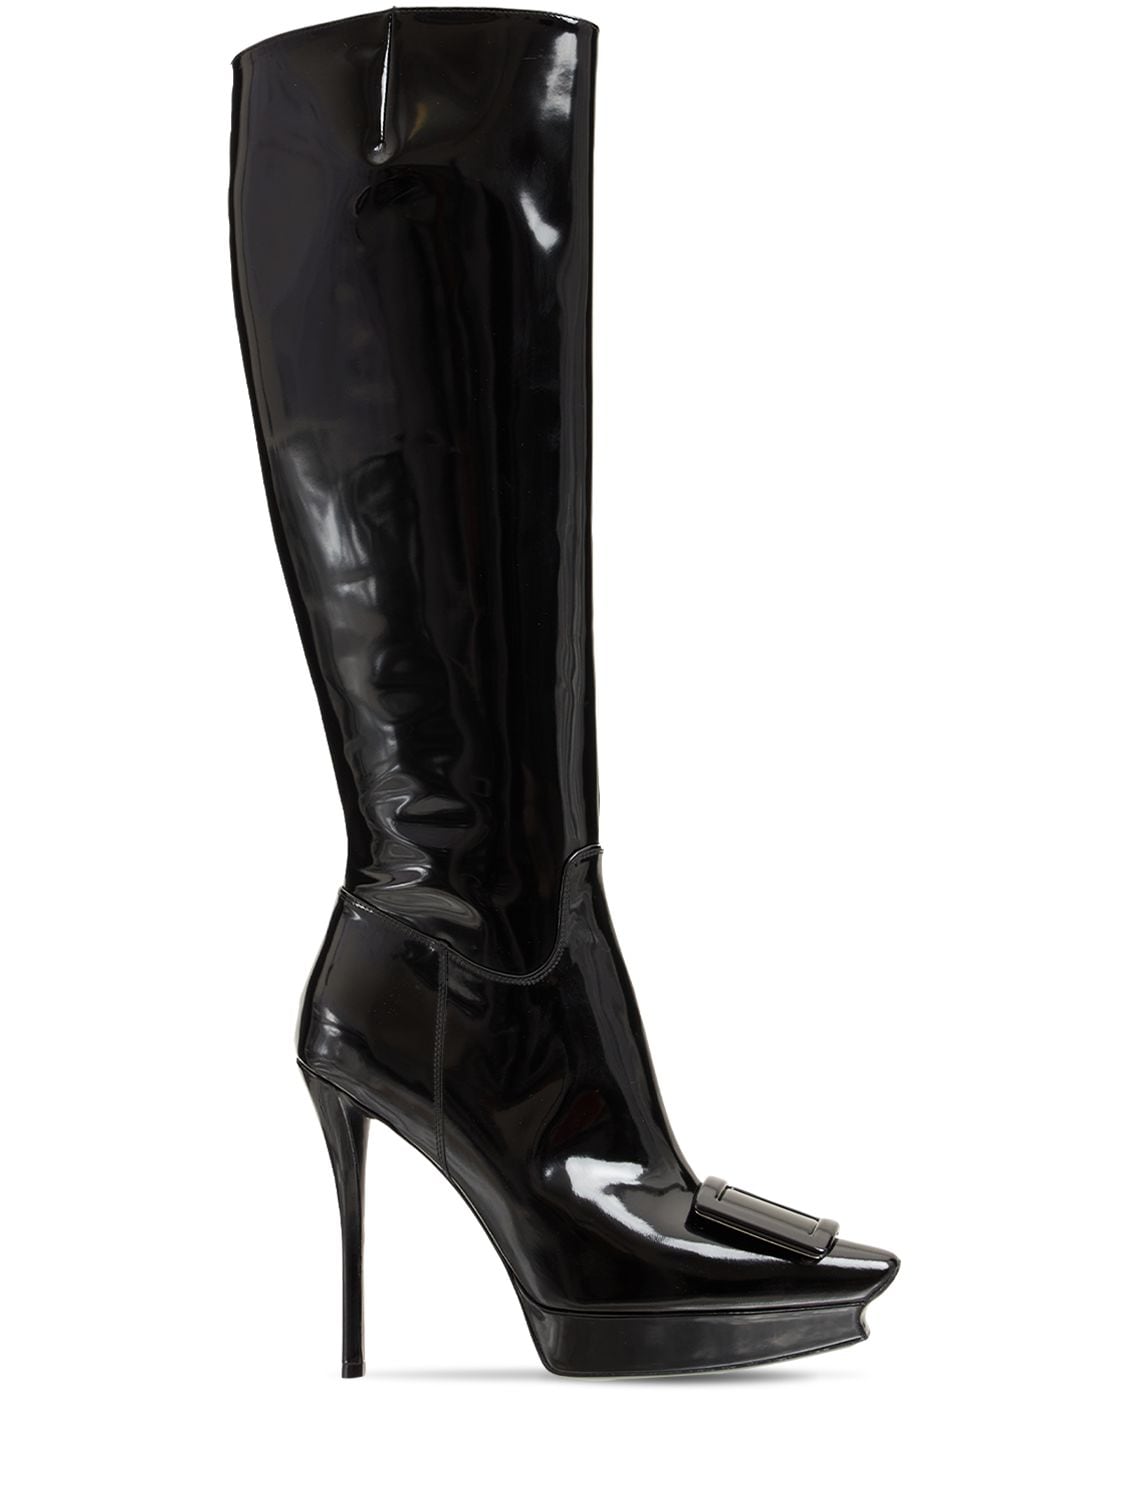 ROGER VIVIER 120MM PATENT LEATHER TALL BOOTS,74II9S006-QJK5OQ2